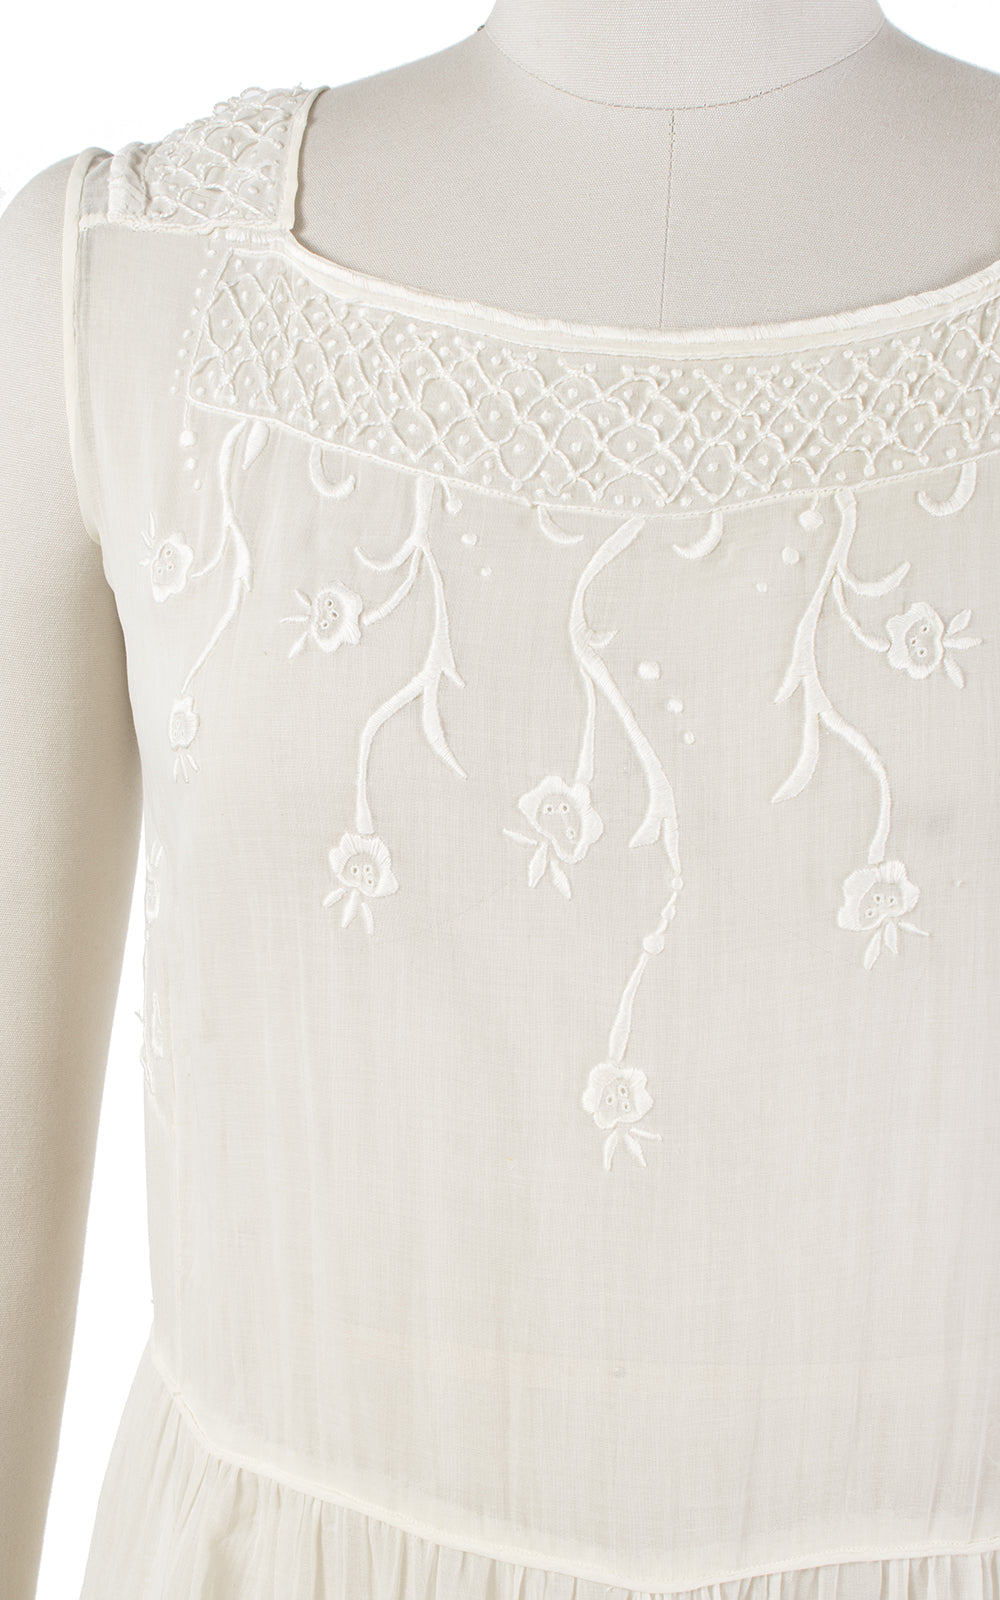 1920s Floral Embroidered Sheer Cotton Voile Summer Dress | small